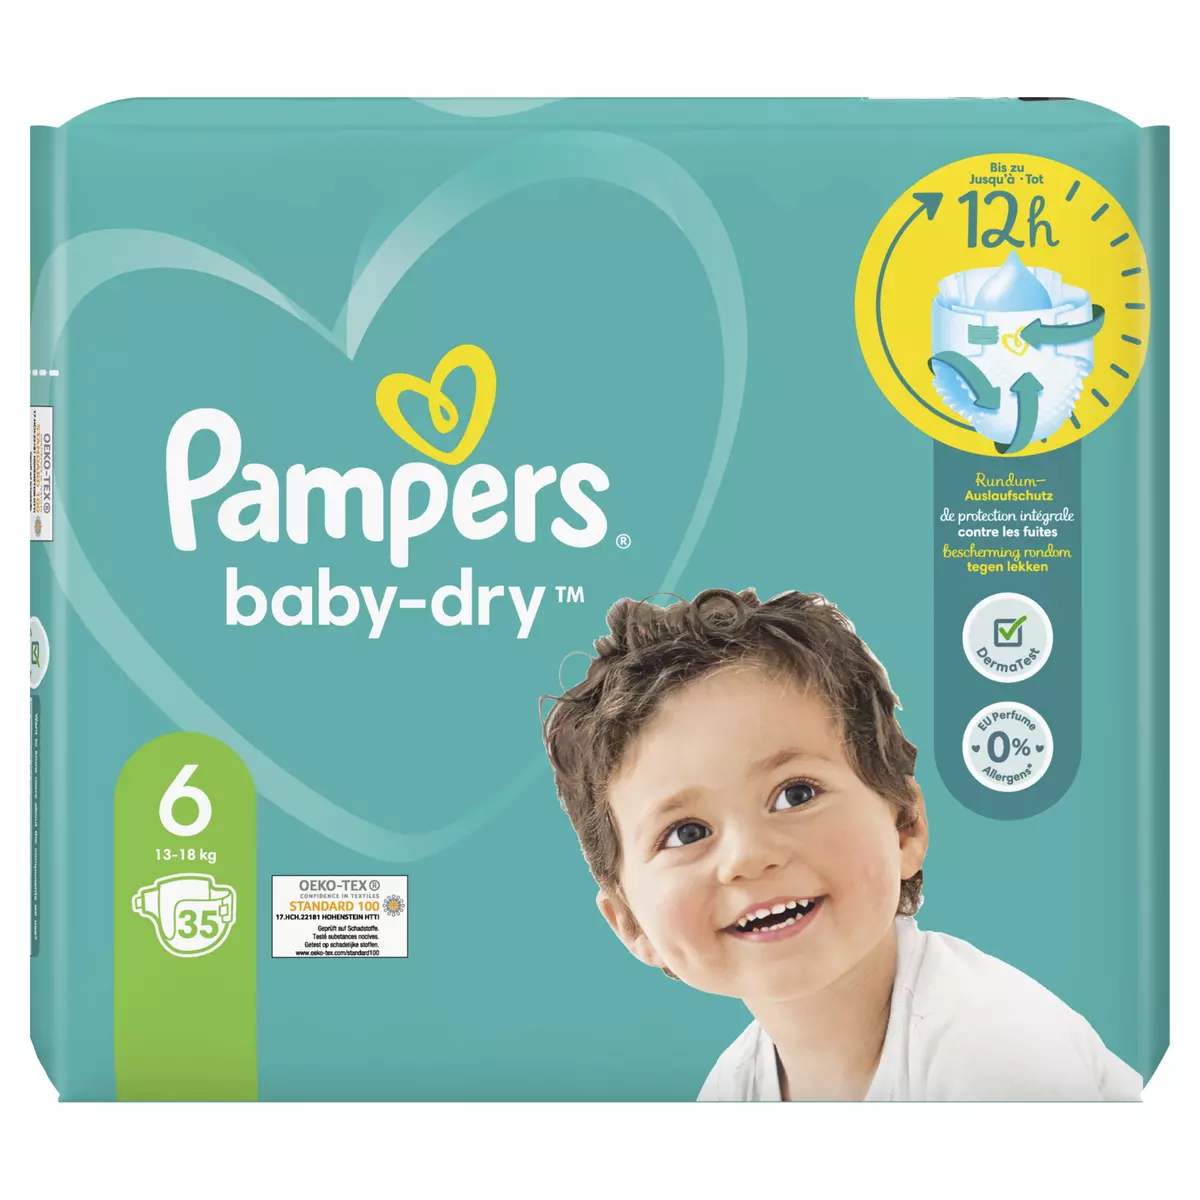 PAMPERS Baby-dry couches taille 6 (13-18kg) jusqu'à 12h de protection 35 couches